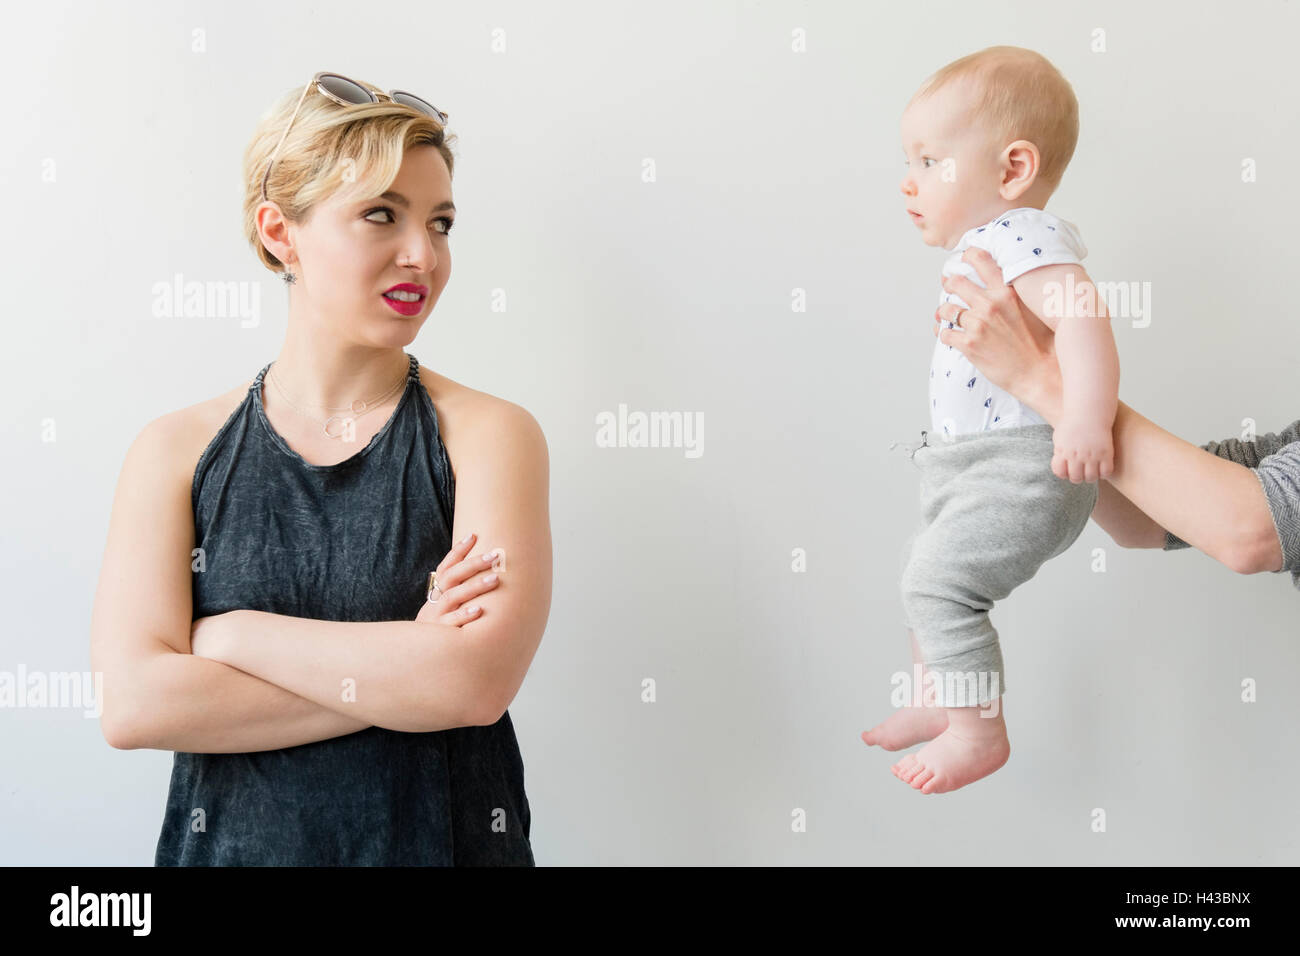 Caucasian woman disgusted at woman offering baby Stock Photo